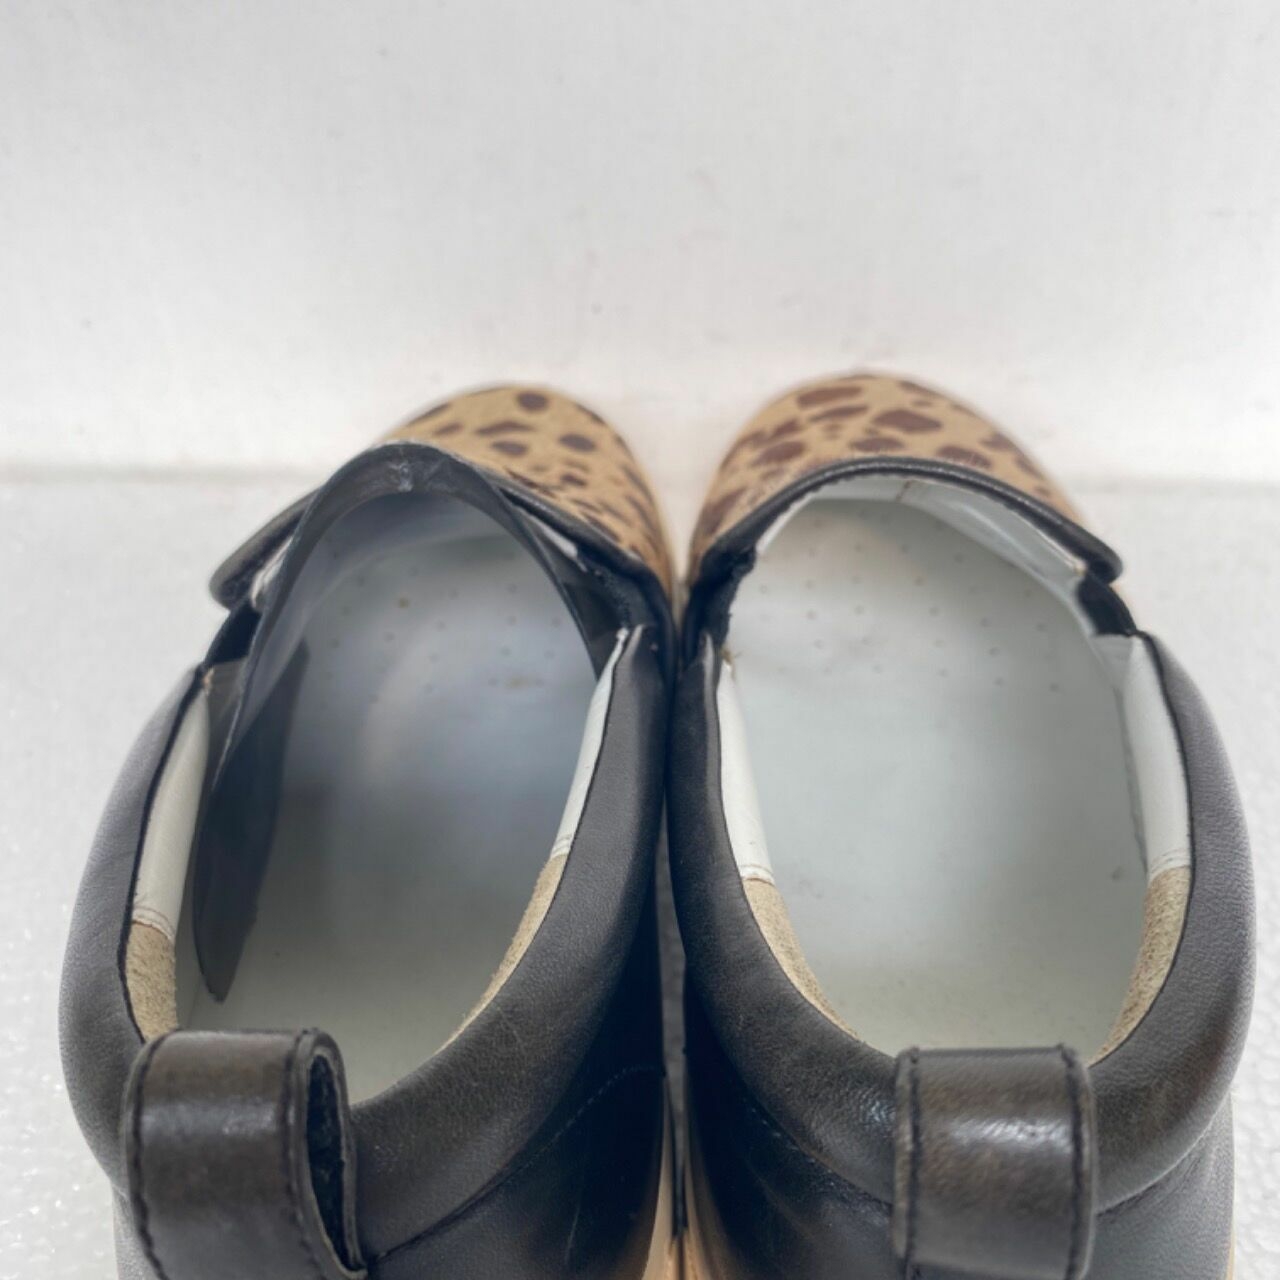 Marc By Marc Jacobs Brown Leopard Print Slip On